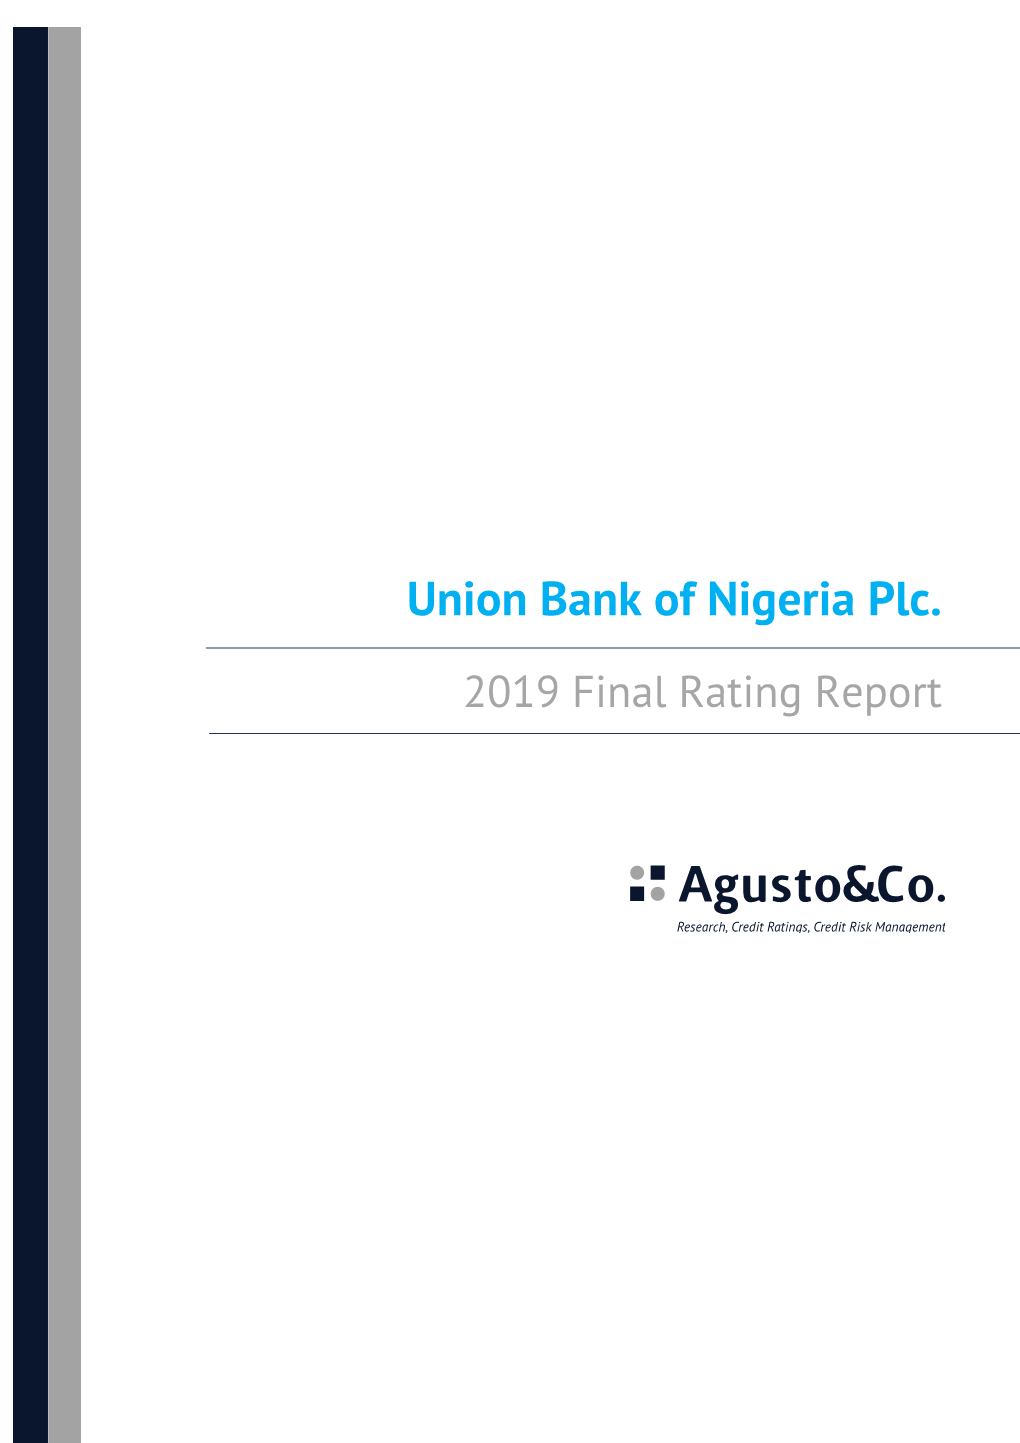 Union Bank of Nigeria Plc. 2019 Final Rating Report